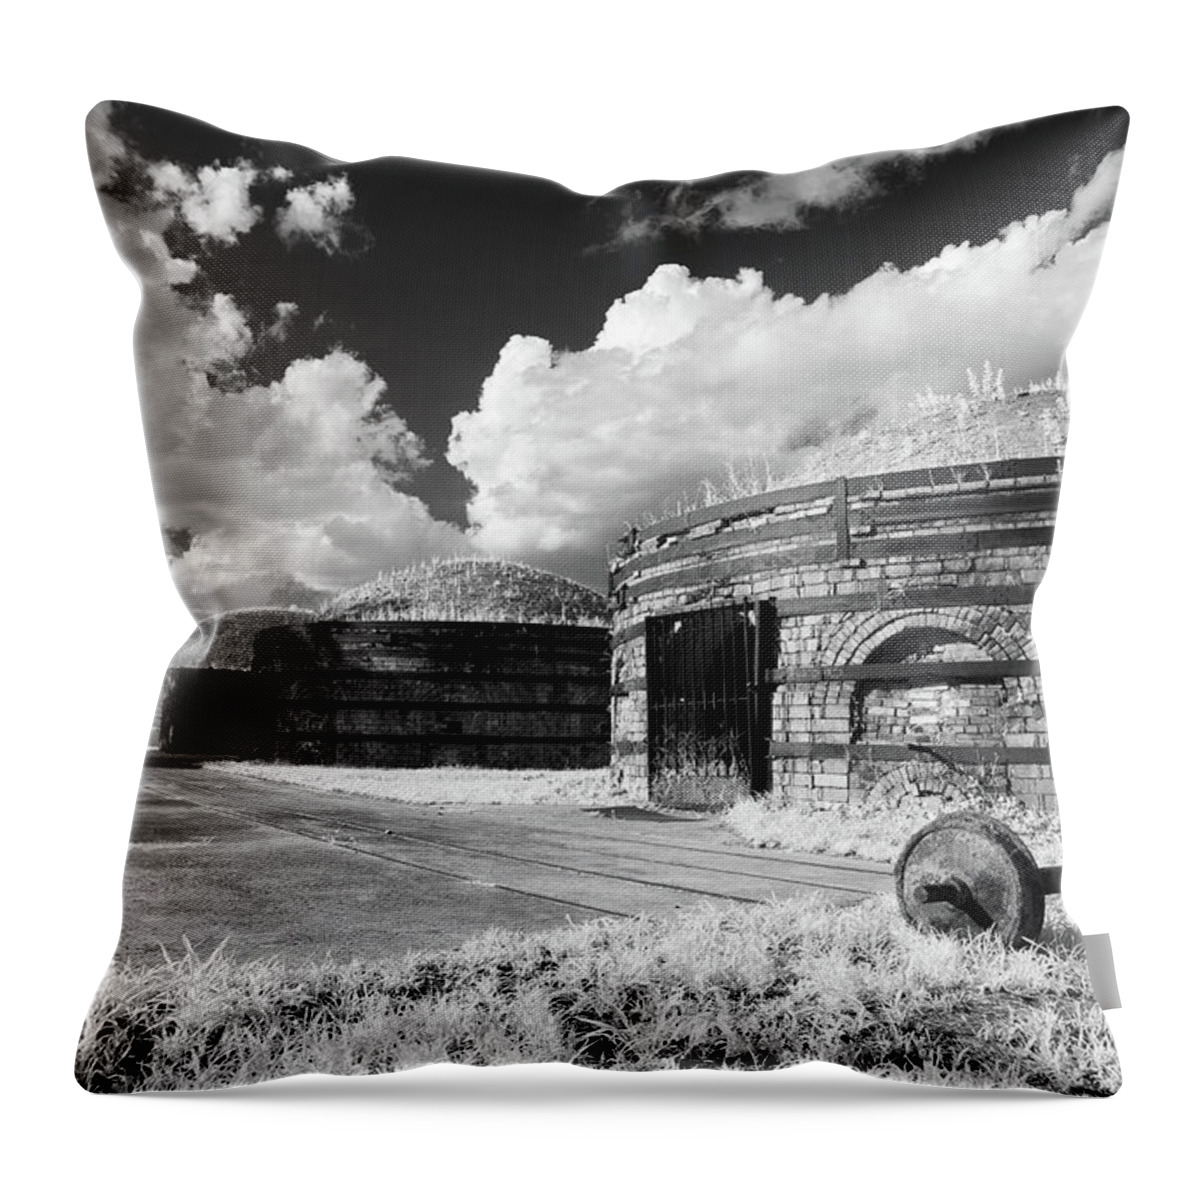 2016 Throw Pillow featuring the photograph Brickworks 52 by Charles Hite